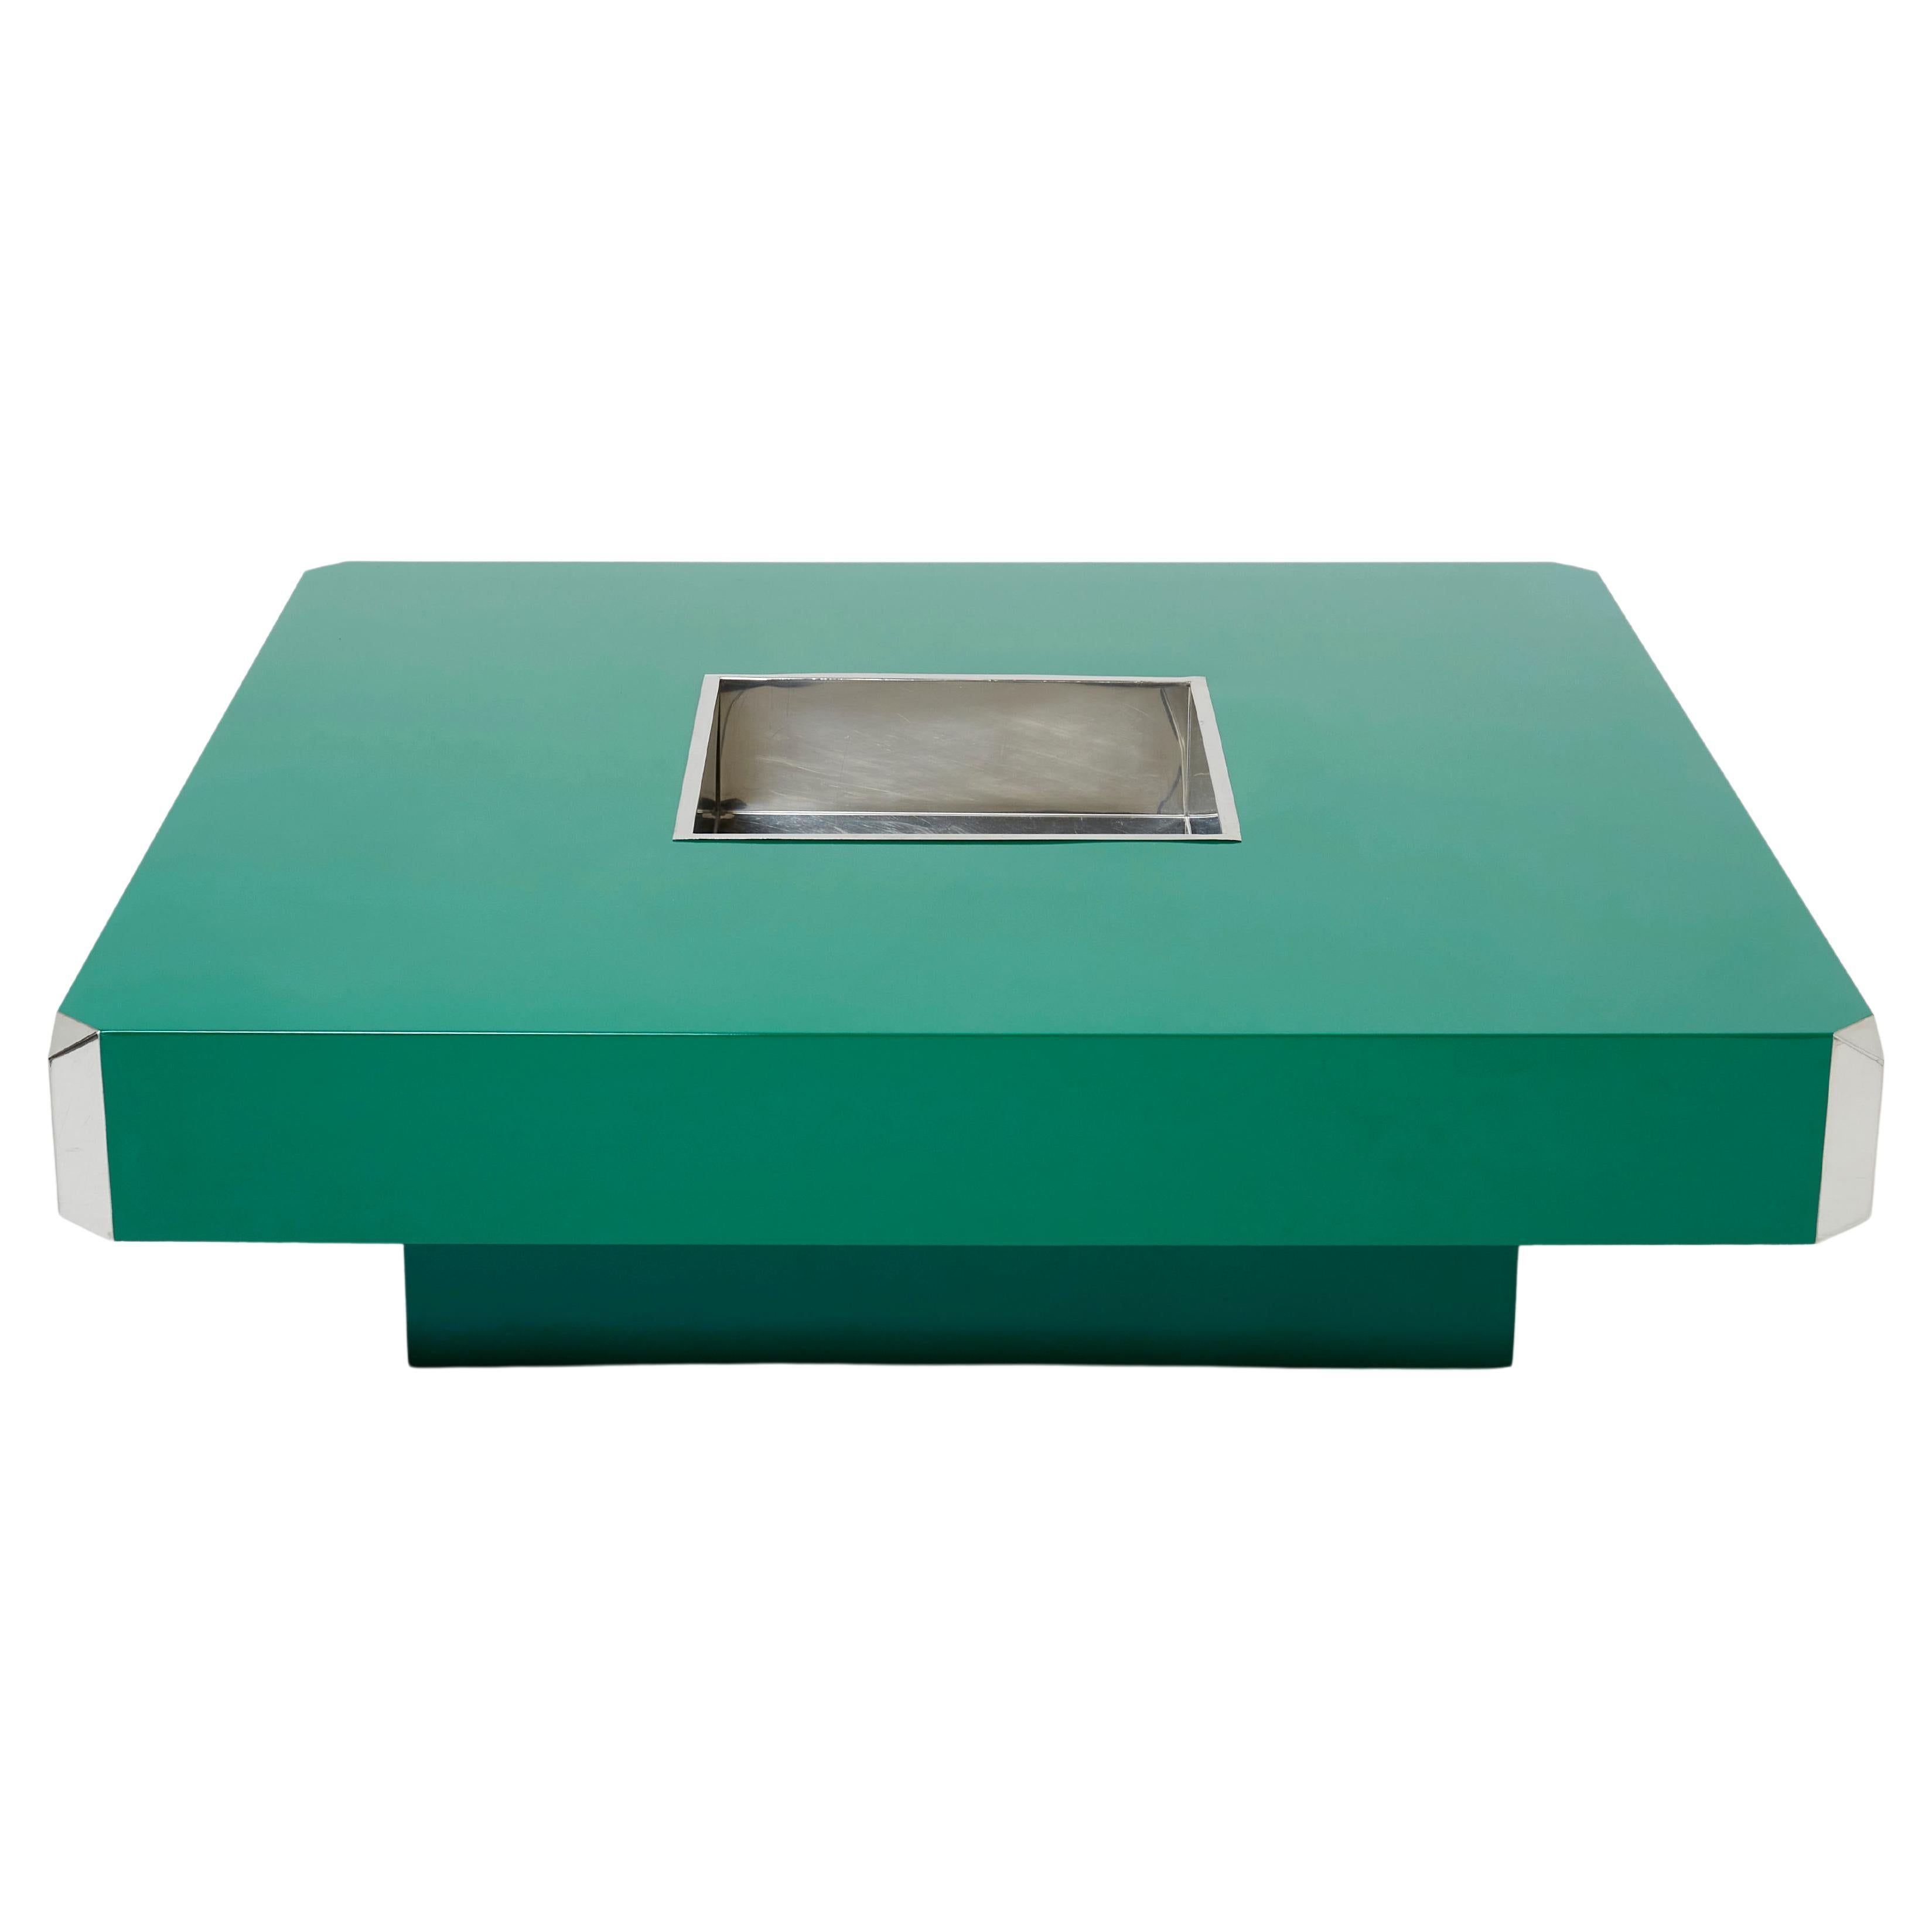 Willy Rizzo Green Lacquer and Chrome Square Bar Coffee Table Alveo 1970s